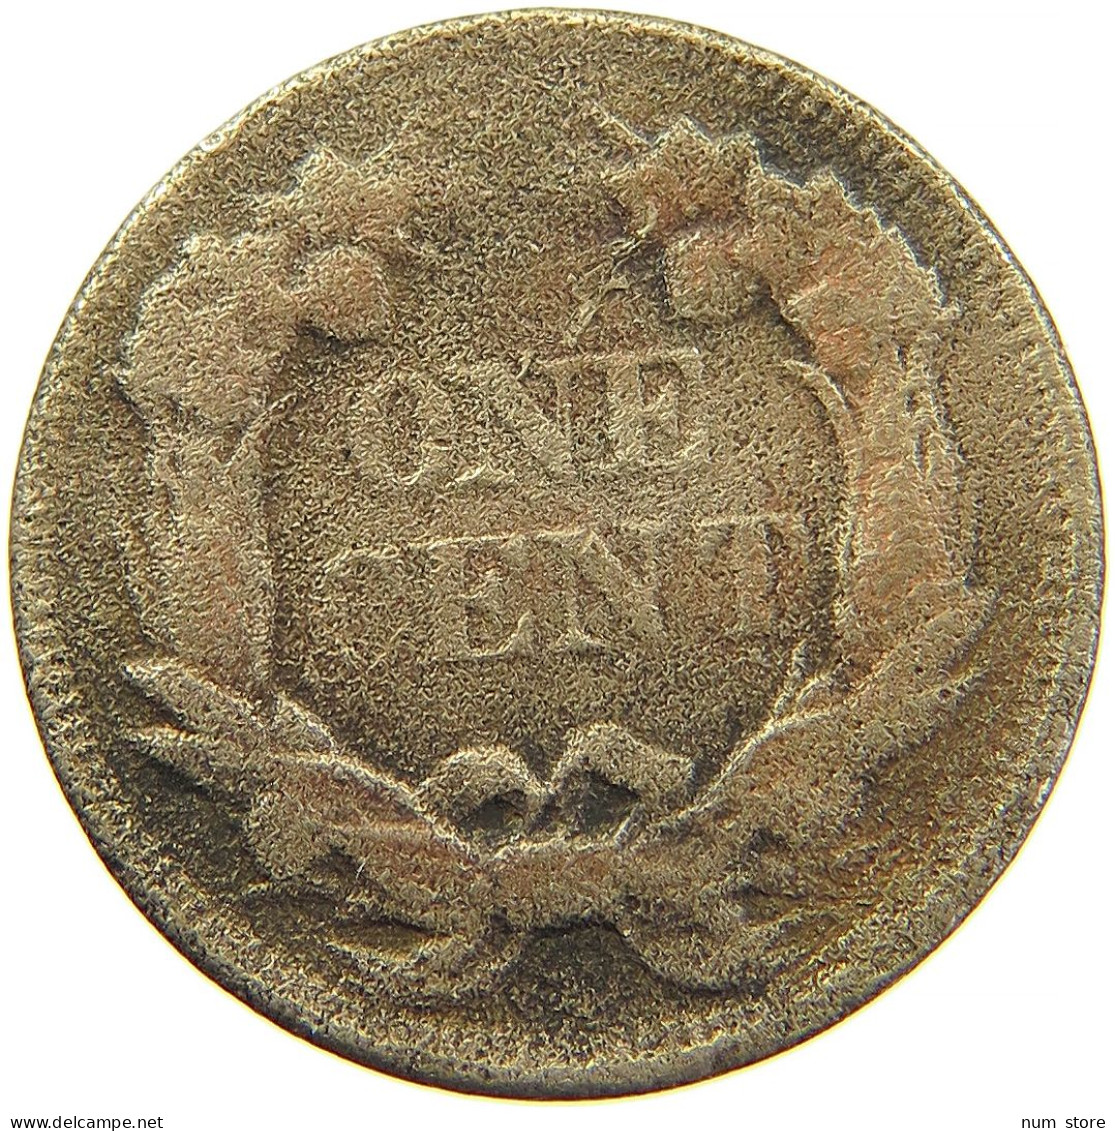 UNITED STATES OF AMERICA CENT 1858 FLYING EAGLE #s091 0401 - 1856-1858: Flying Eagle (Aigle Volant)